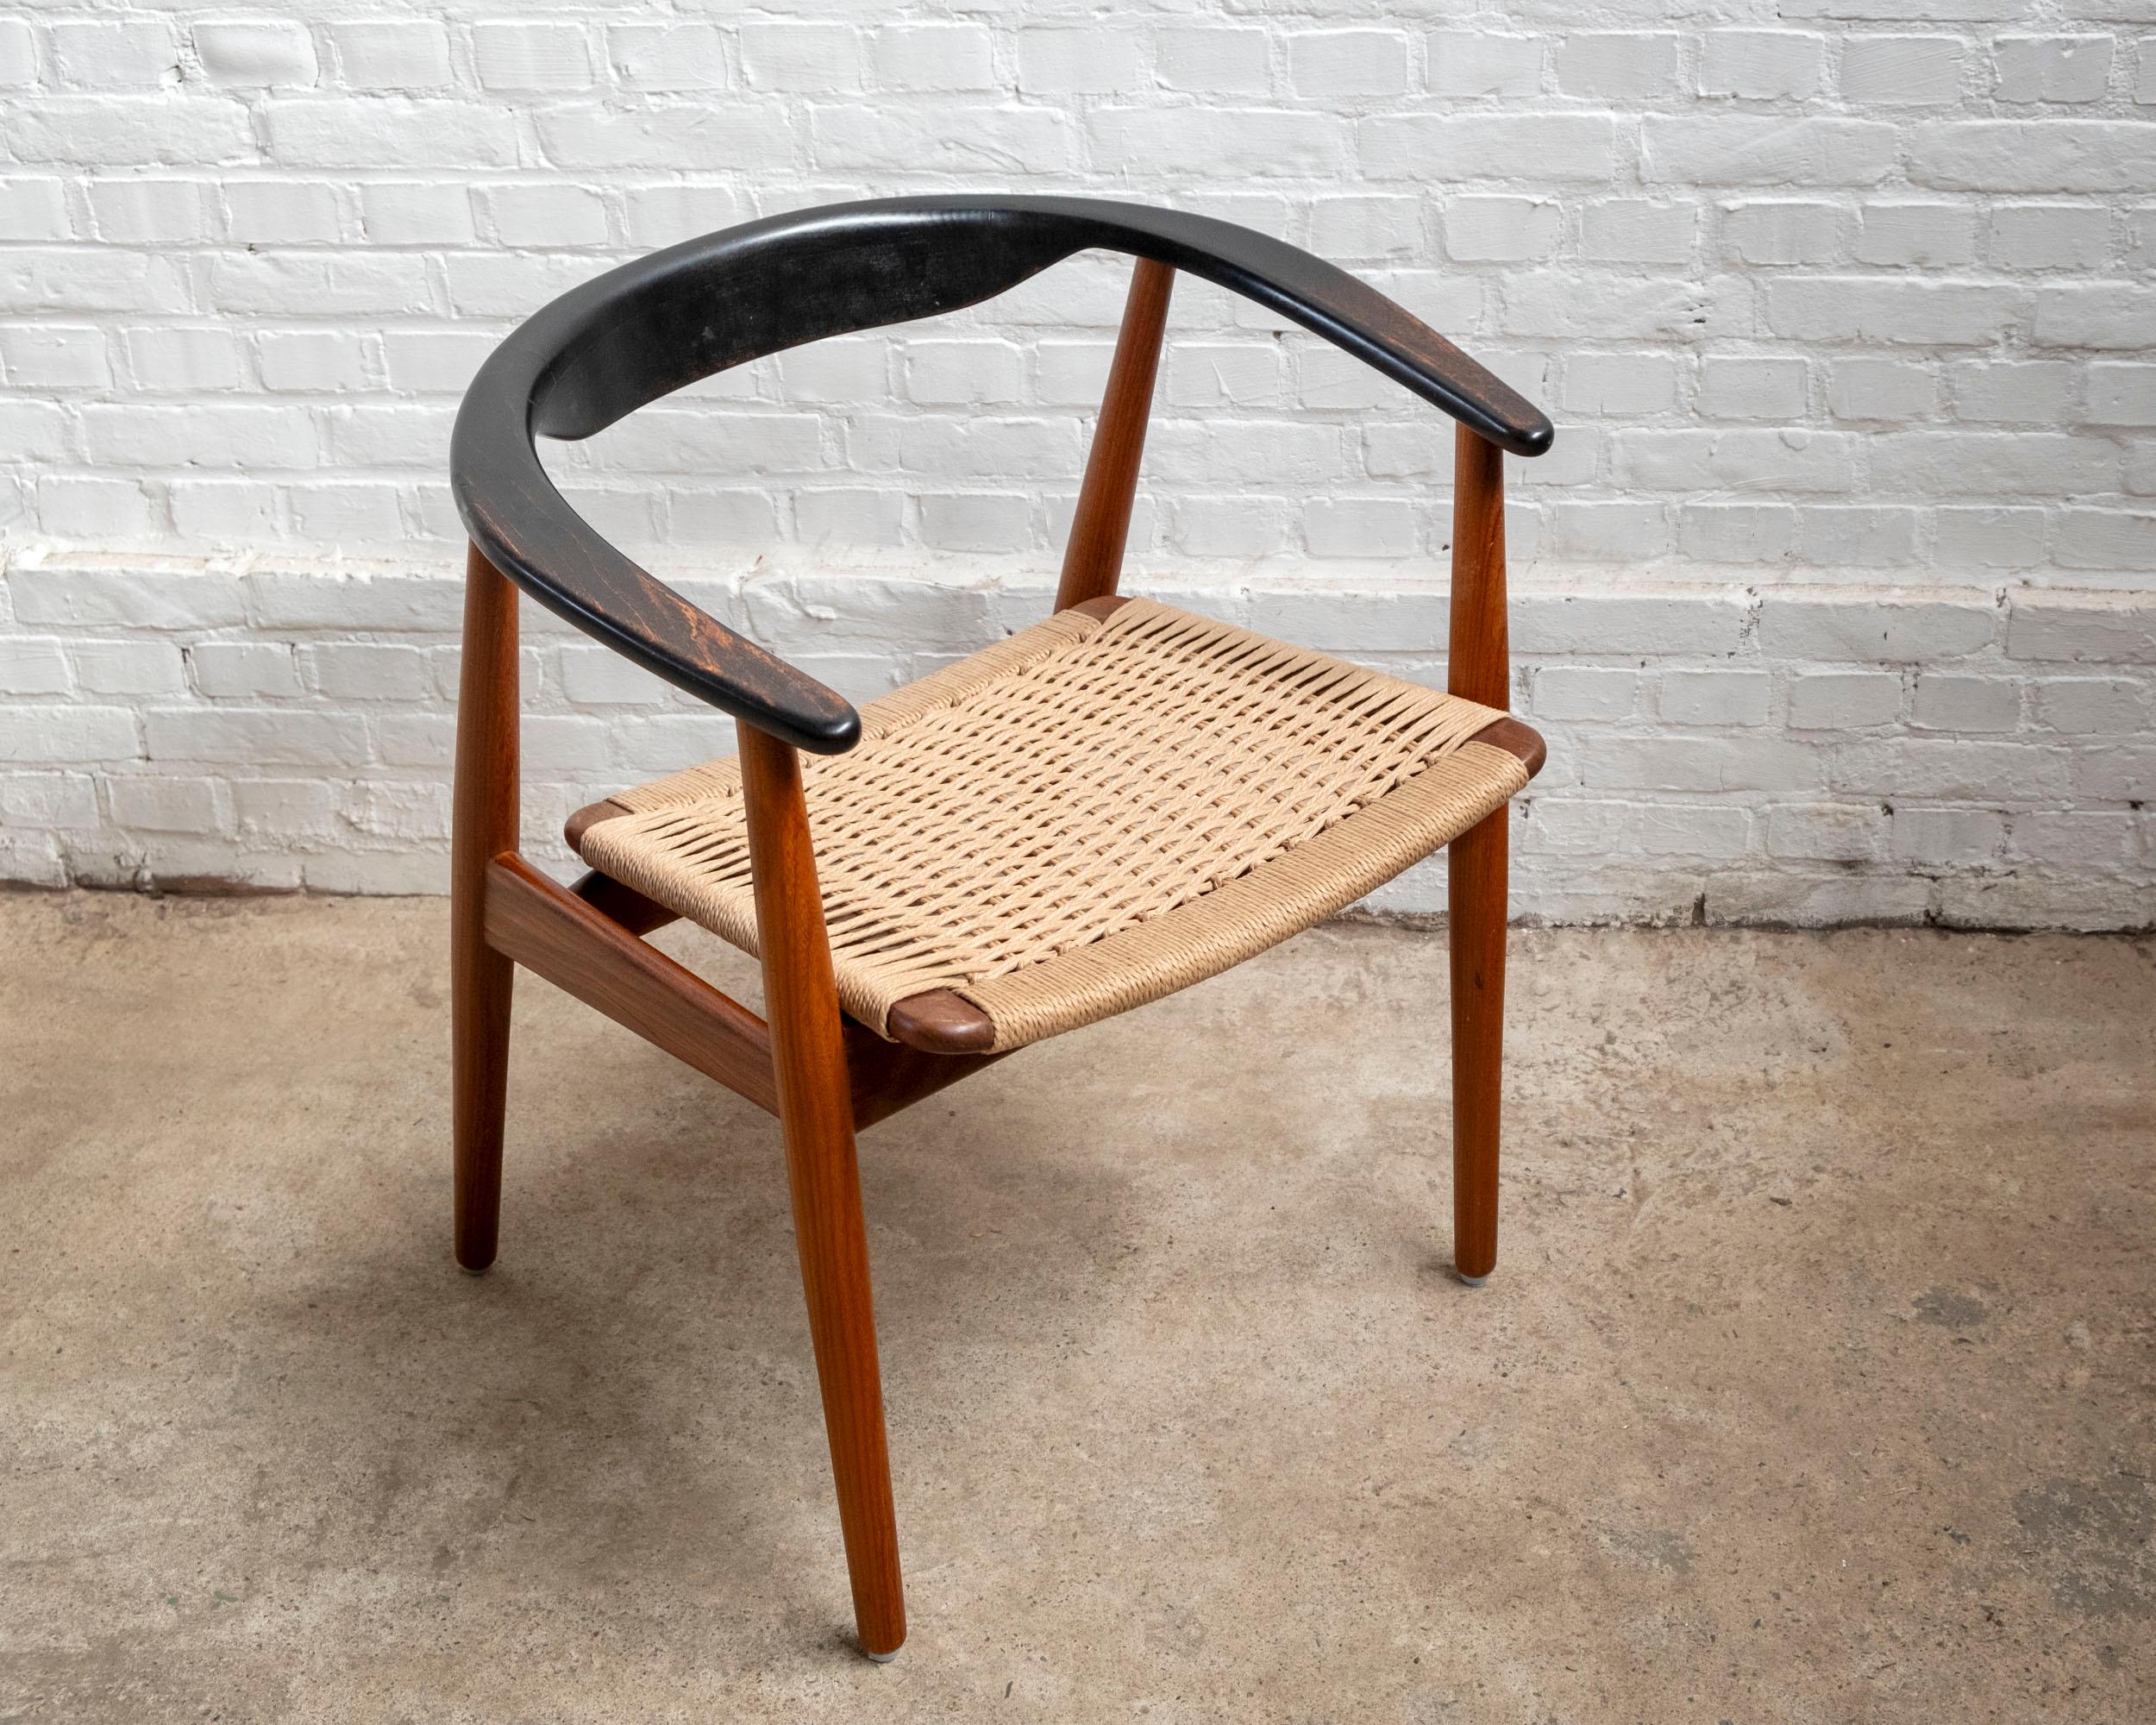 Superbly designed and crafted armchair in teak with a seat woven in danish papercord. The designer is unknown but the chair resembles the style of Illum Wikkelsø and Henry Kjærnulf. Would be beautiful with a freestanding desk or in a mix of chairs